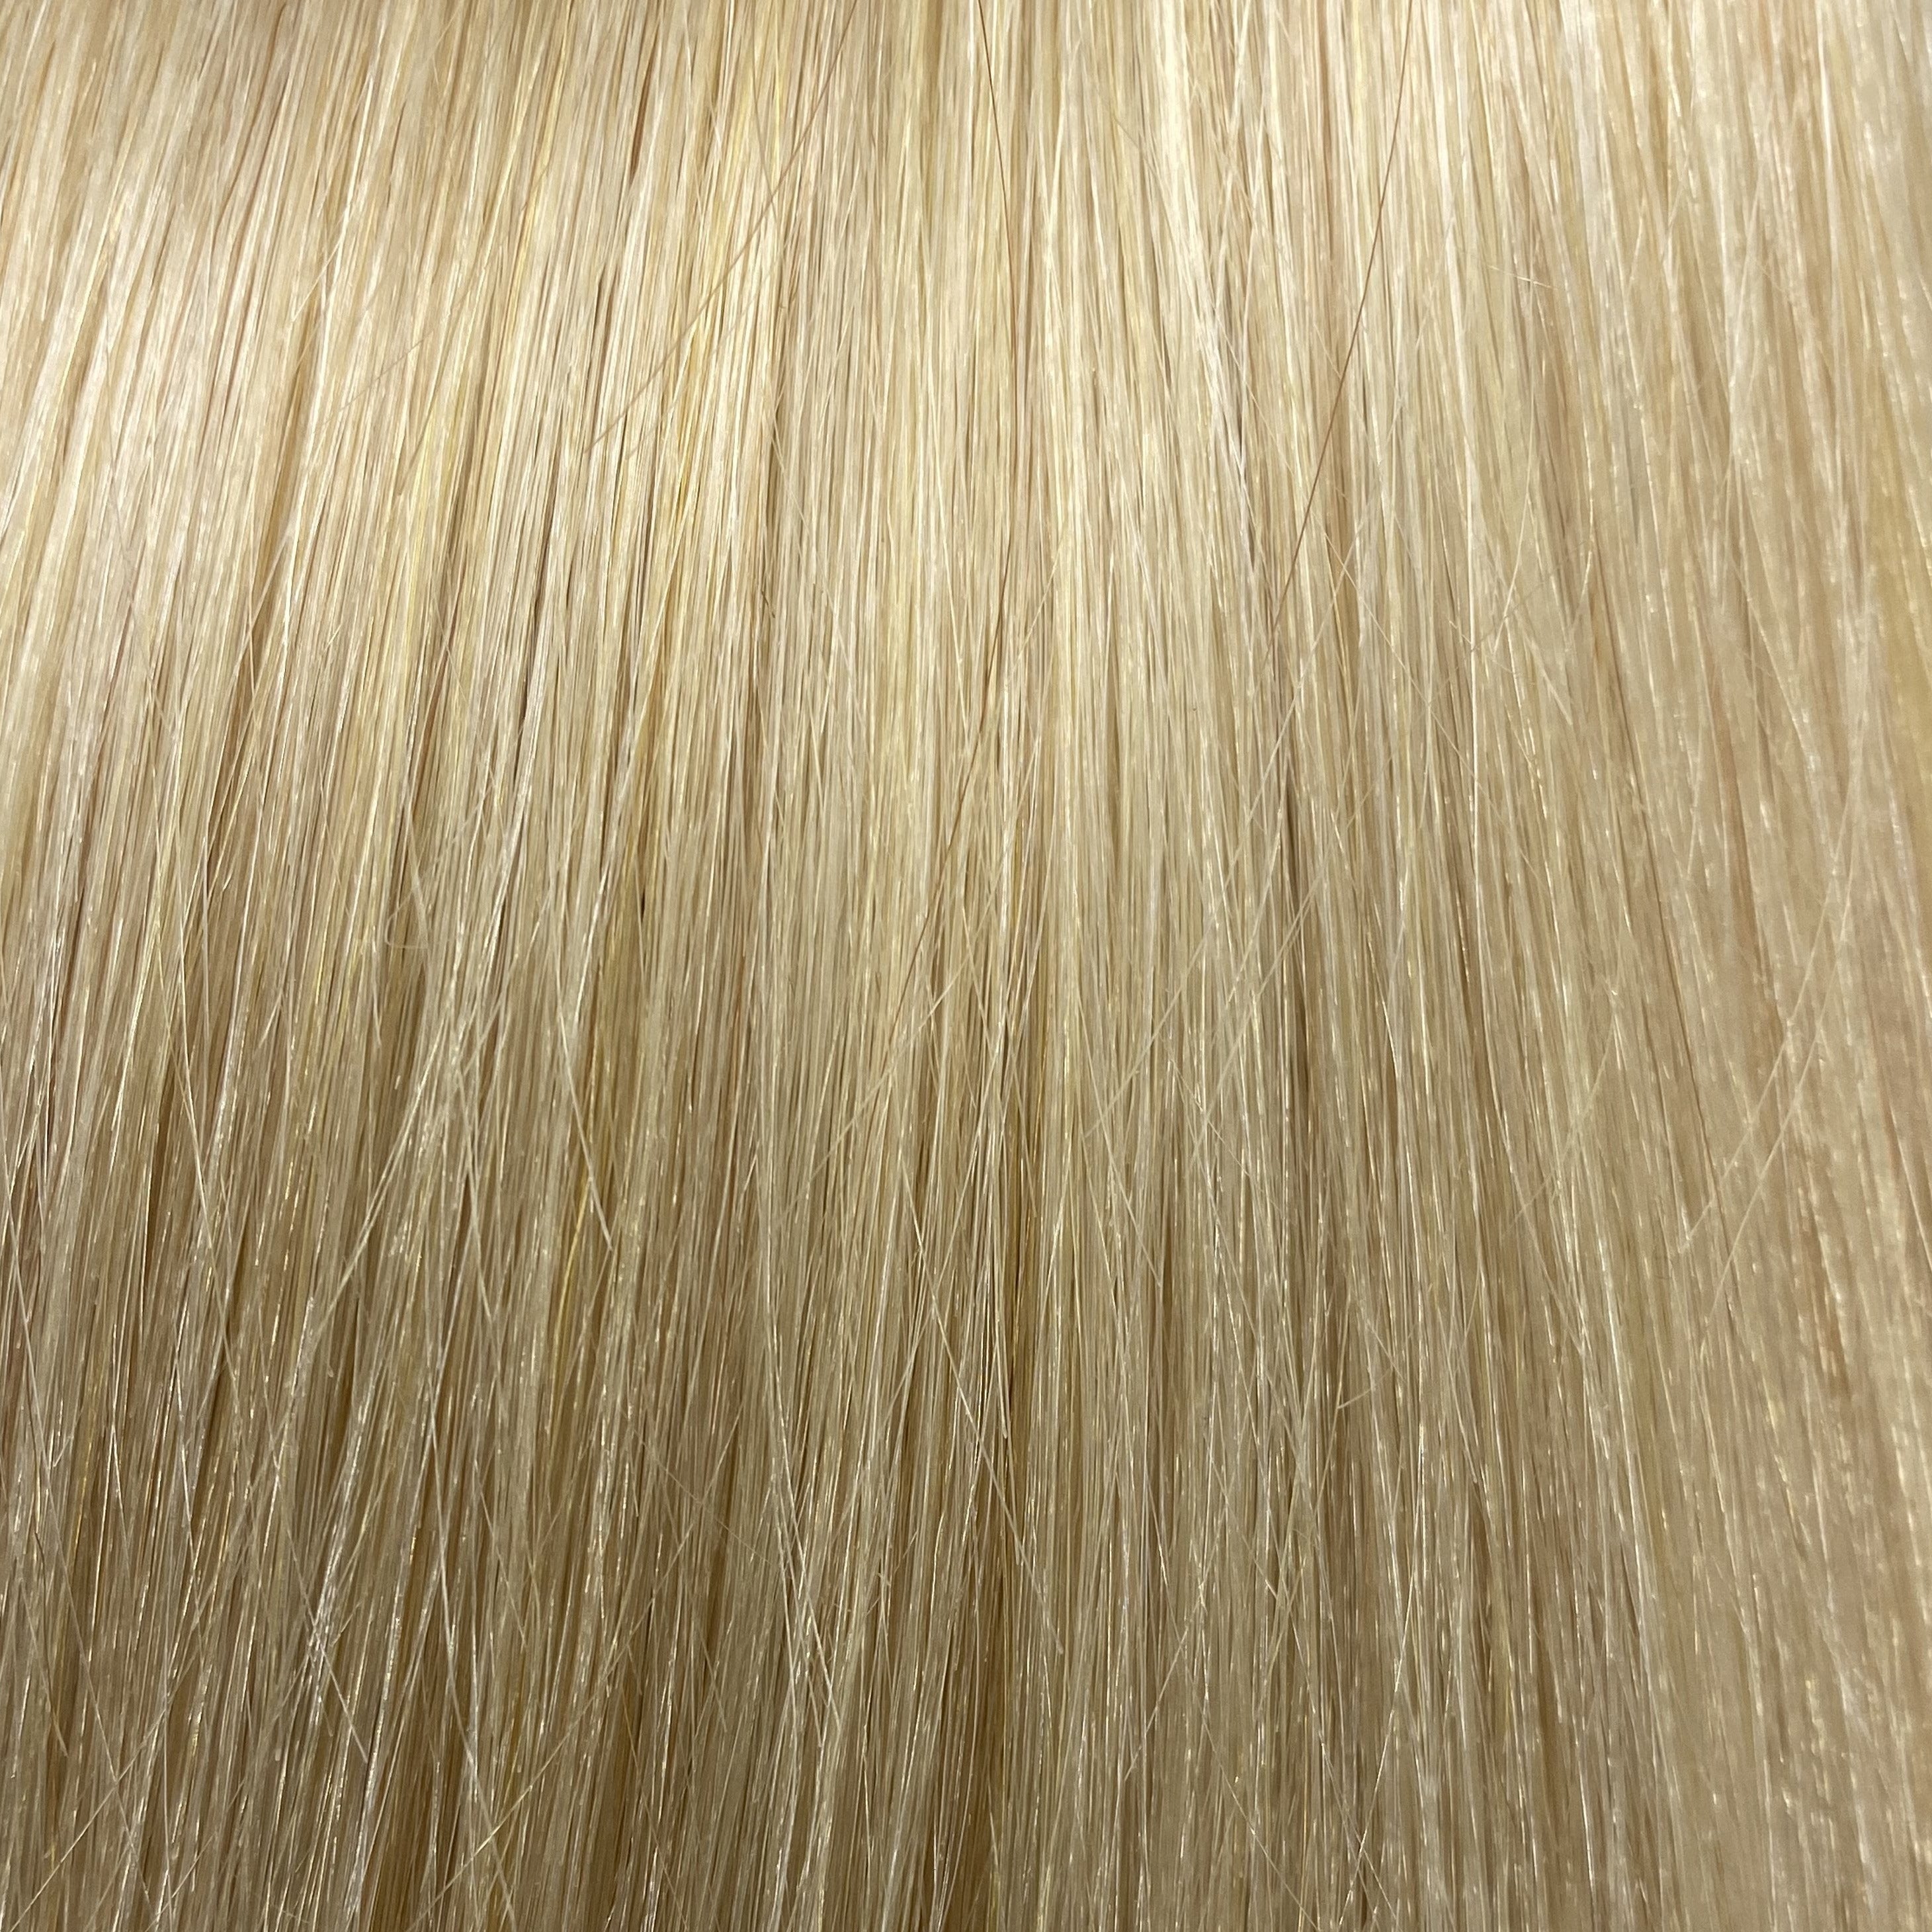 Velo #1004- 20 Inches - Ultra Very Light Platinum Blonde - 175 Grams | clip in hair extensions